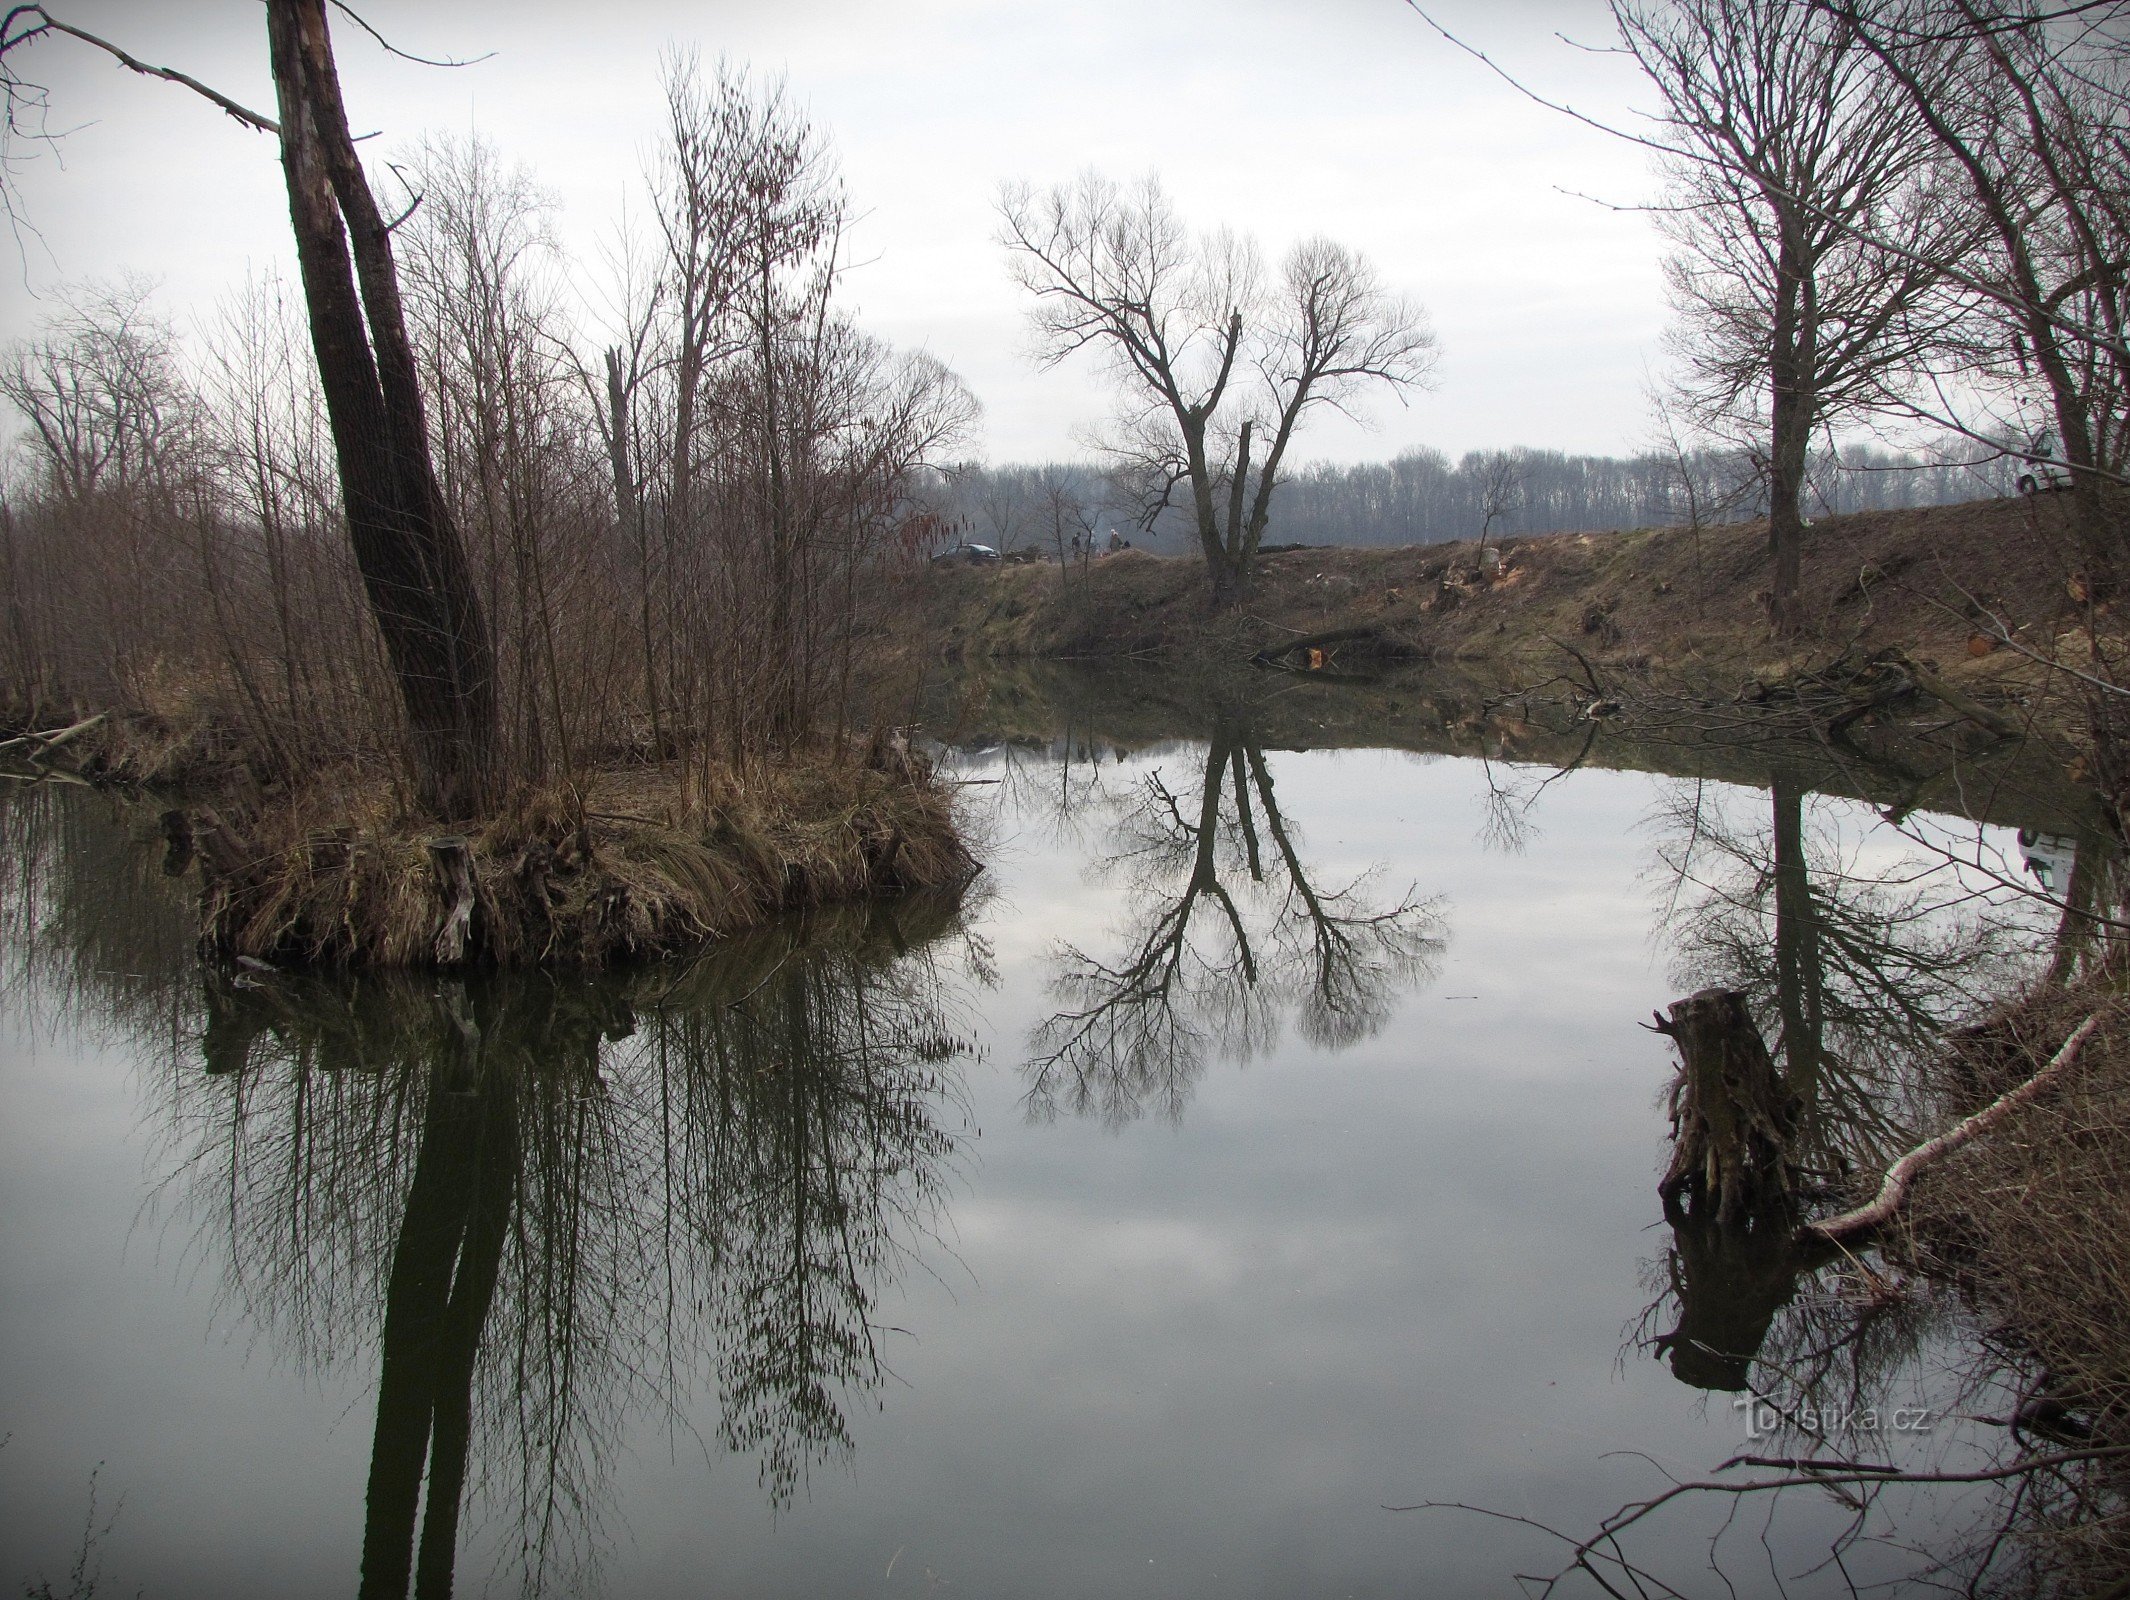 About the blind branches of the Morava River in Slovácko